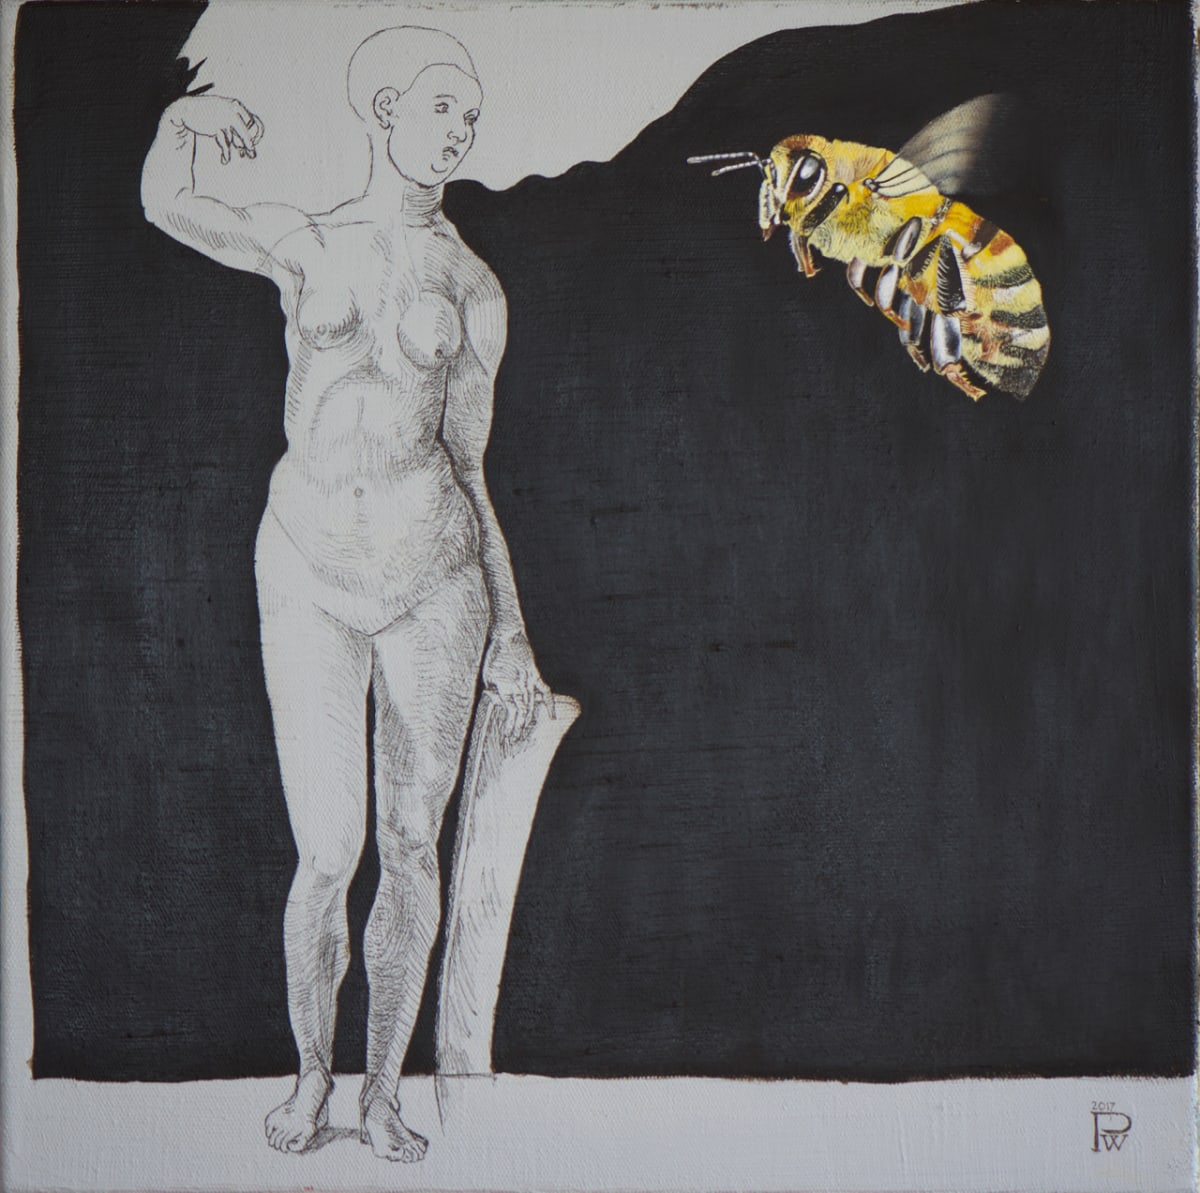 Woman and the bee / Femme et abeille by Philippe Walker  Image: Composition based on drawing by A Dürer